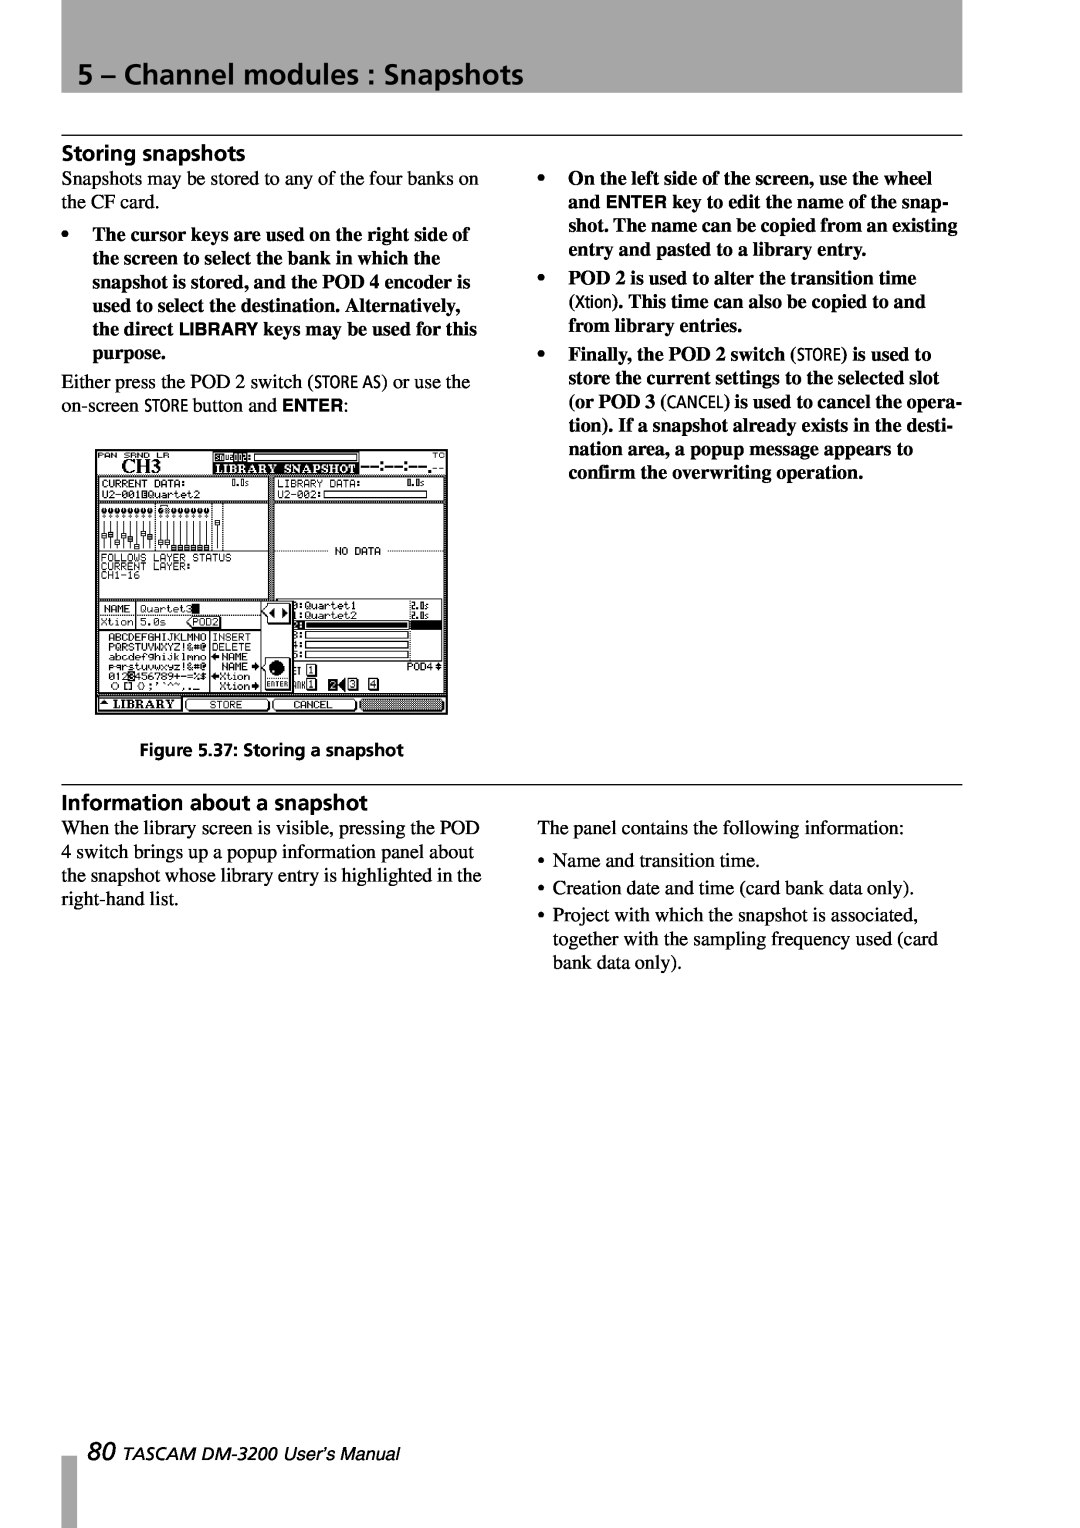 Tascam DM-3200 owner manual Storing snapshots, Information about a snapshot, 5 – Channel modules : Snapshots 